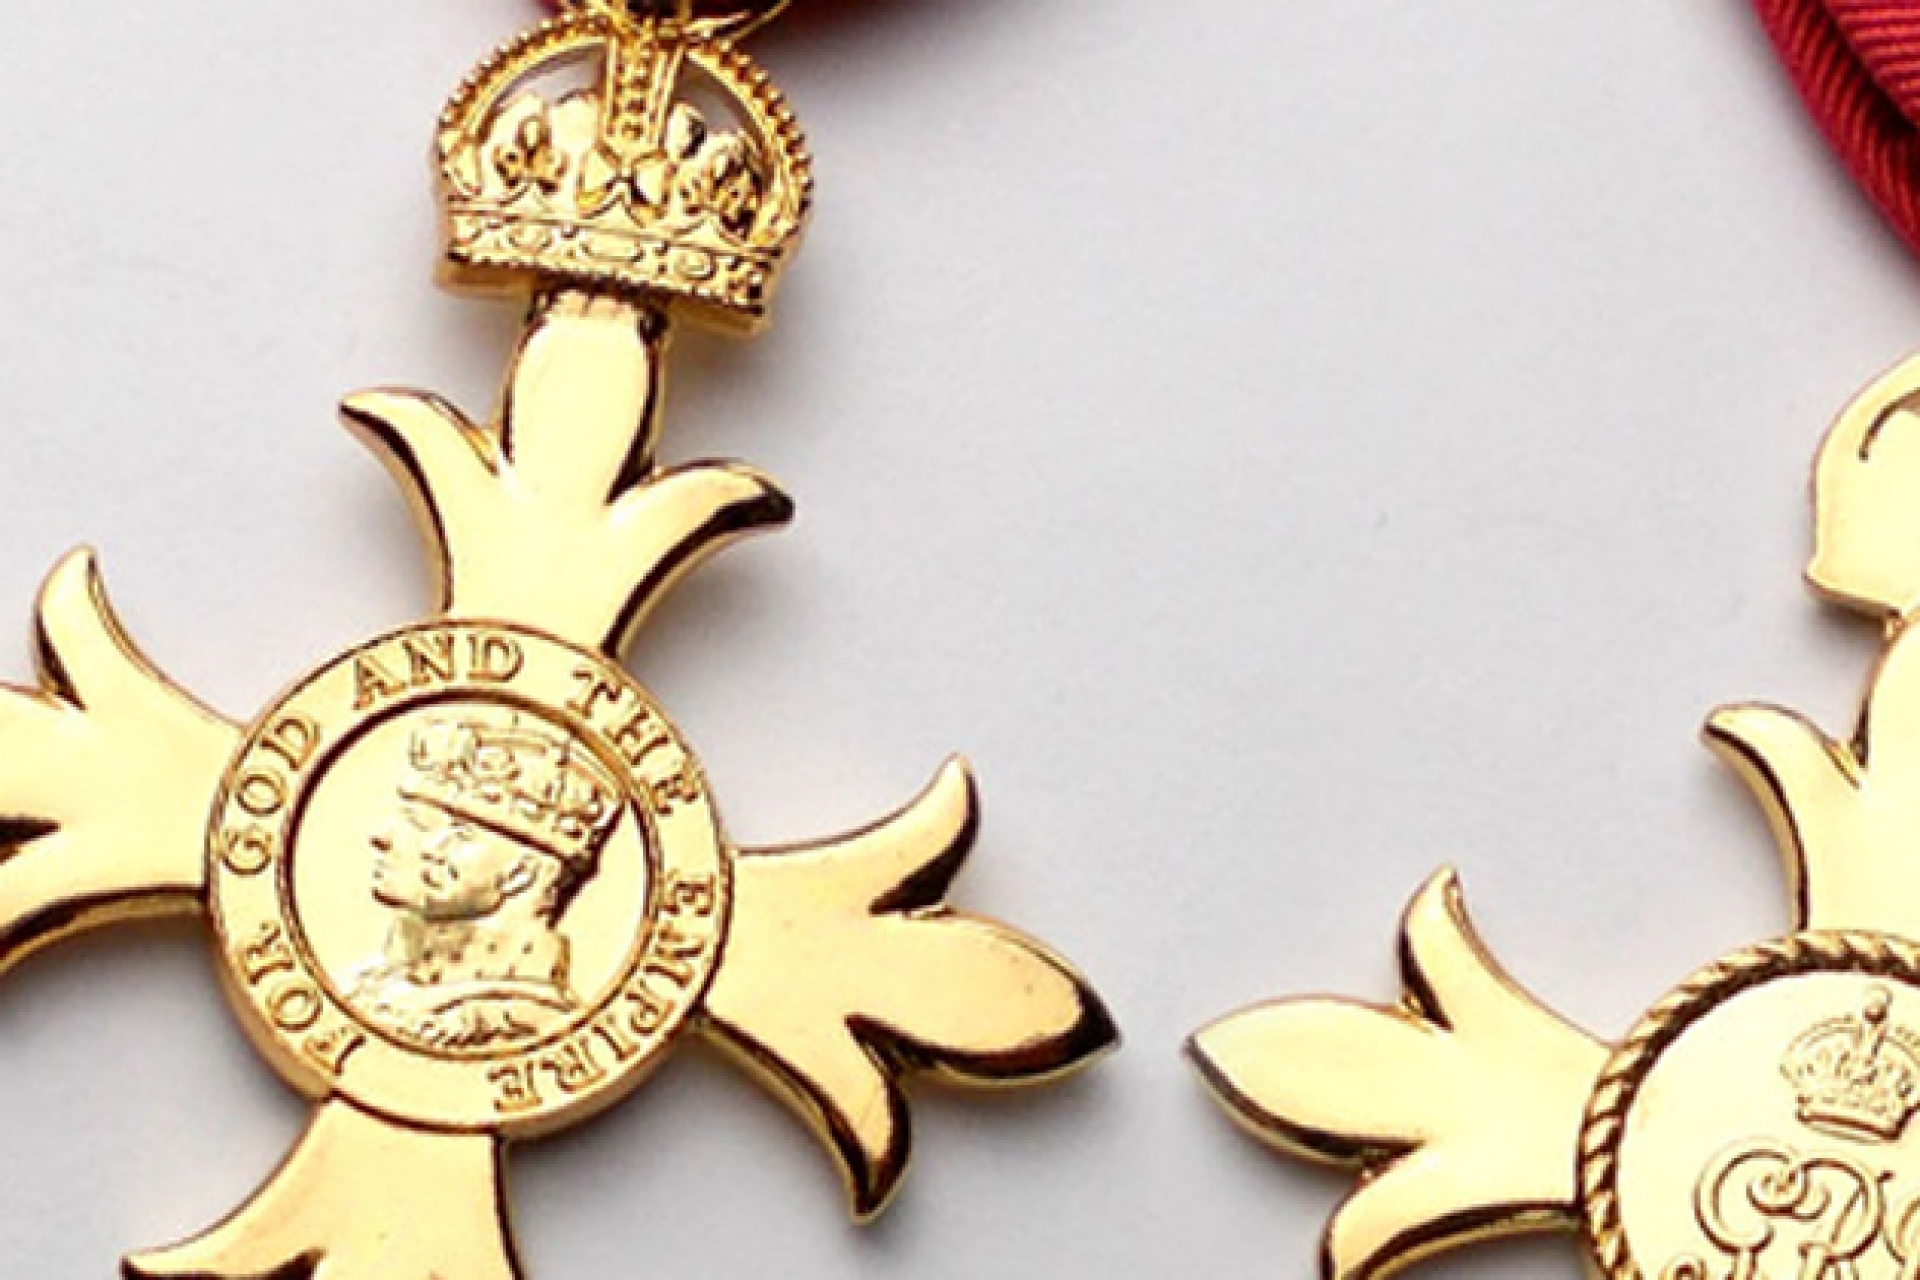 Our Nation's Publishing Heroes Named in this Year's Honours List